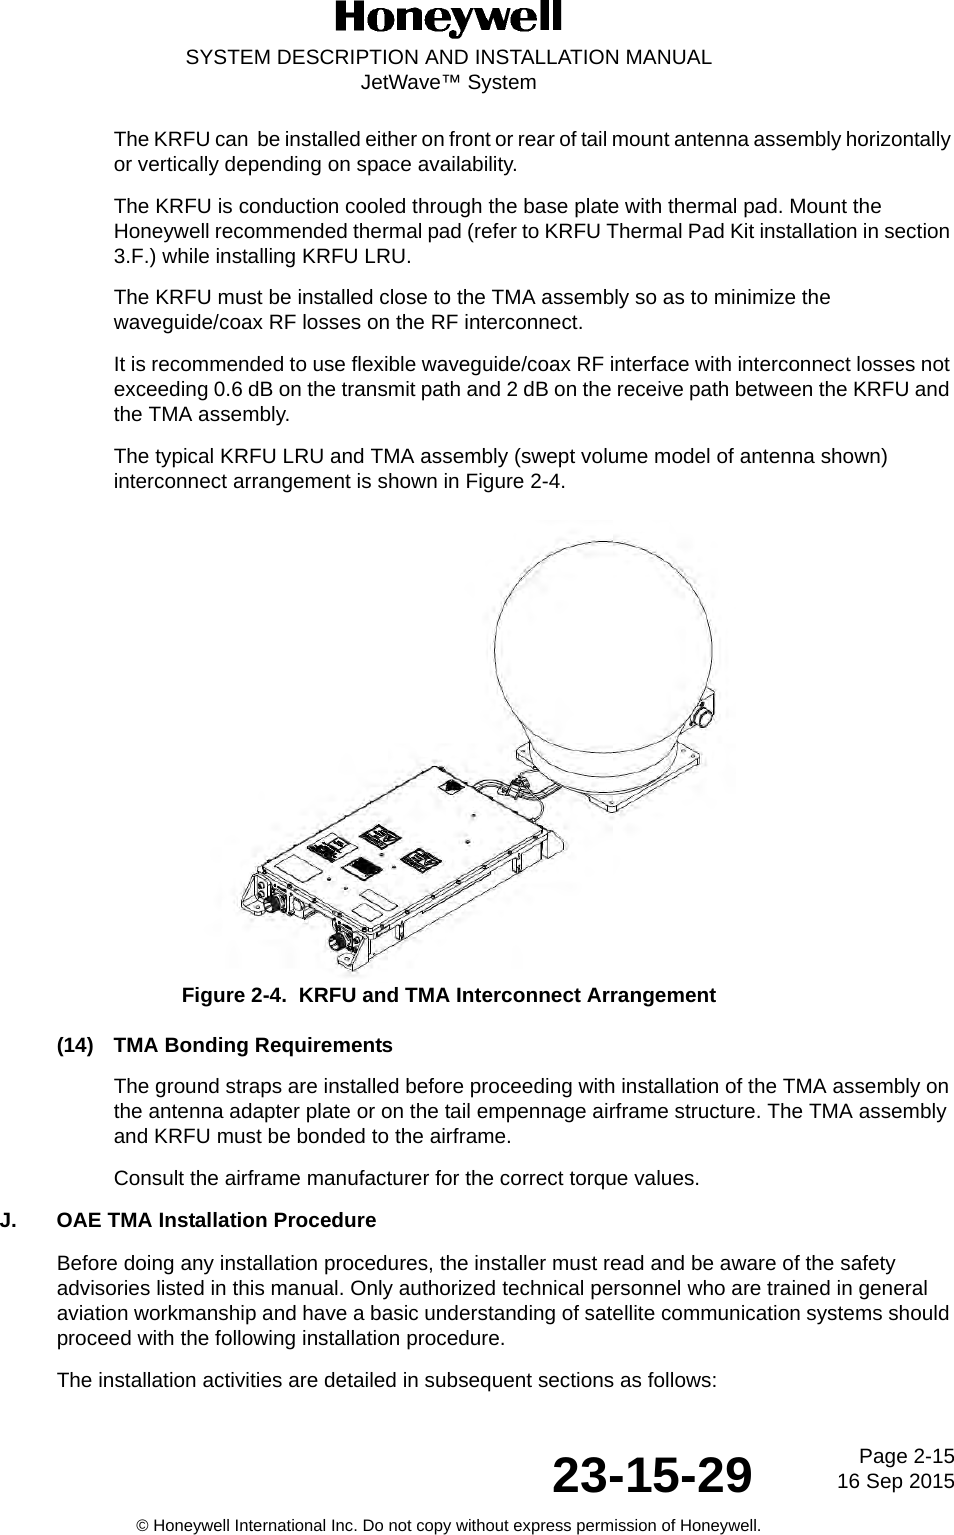 Page 2-15 16 Sep 201523-15-29SYSTEM DESCRIPTION AND INSTALLATION MANUALJetWave™ System© Honeywell International Inc. Do not copy without express permission of Honeywell.The KRFU can  be installed either on front or rear of tail mount antenna assembly horizontally or vertically depending on space availability. The KRFU is conduction cooled through the base plate with thermal pad. Mount the Honeywell recommended thermal pad (refer to KRFU Thermal Pad Kit installation in section 3.F.) while installing KRFU LRU. The KRFU must be installed close to the TMA assembly so as to minimize the waveguide/coax RF losses on the RF interconnect. It is recommended to use flexible waveguide/coax RF interface with interconnect losses not exceeding 0.6 dB on the transmit path and 2 dB on the receive path between the KRFU and the TMA assembly. The typical KRFU LRU and TMA assembly (swept volume model of antenna shown) interconnect arrangement is shown in Figure 2-4. Figure 2-4.  KRFU and TMA Interconnect Arrangement(14) TMA Bonding RequirementsThe ground straps are installed before proceeding with installation of the TMA assembly on the antenna adapter plate or on the tail empennage airframe structure. The TMA assembly and KRFU must be bonded to the airframe.Consult the airframe manufacturer for the correct torque values.J. OAE TMA Installation ProcedureBefore doing any installation procedures, the installer must read and be aware of the safety advisories listed in this manual. Only authorized technical personnel who are trained in general aviation workmanship and have a basic understanding of satellite communication systems should proceed with the following installation procedure. The installation activities are detailed in subsequent sections as follows:  